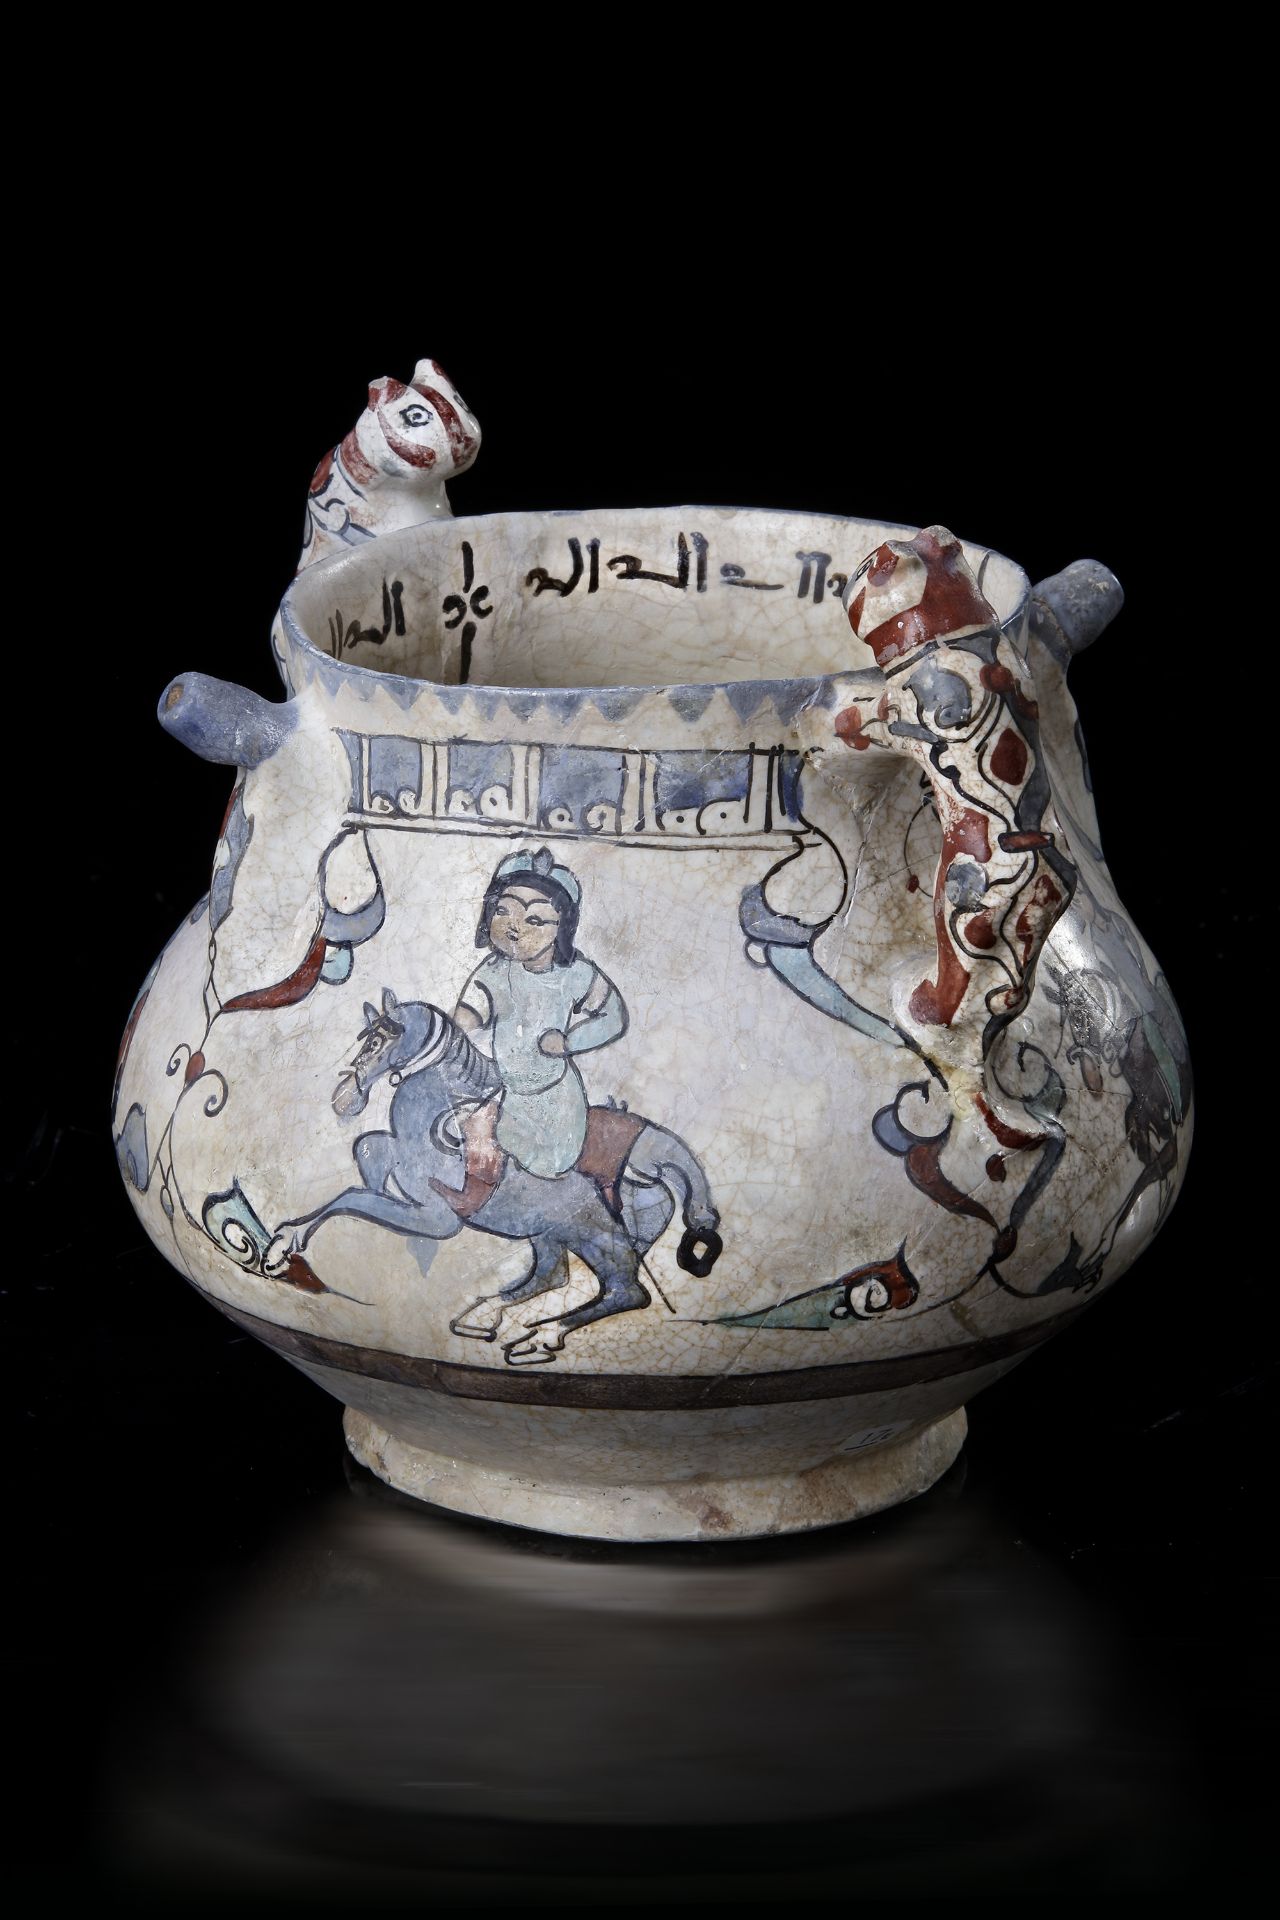 AN ISLAMIC VASE WITH ZOOMORPHIC HANDLES, PERSIA, KASHAN, LATE 12TH-EARLY 13TH CENTURY - Bild 2 aus 5